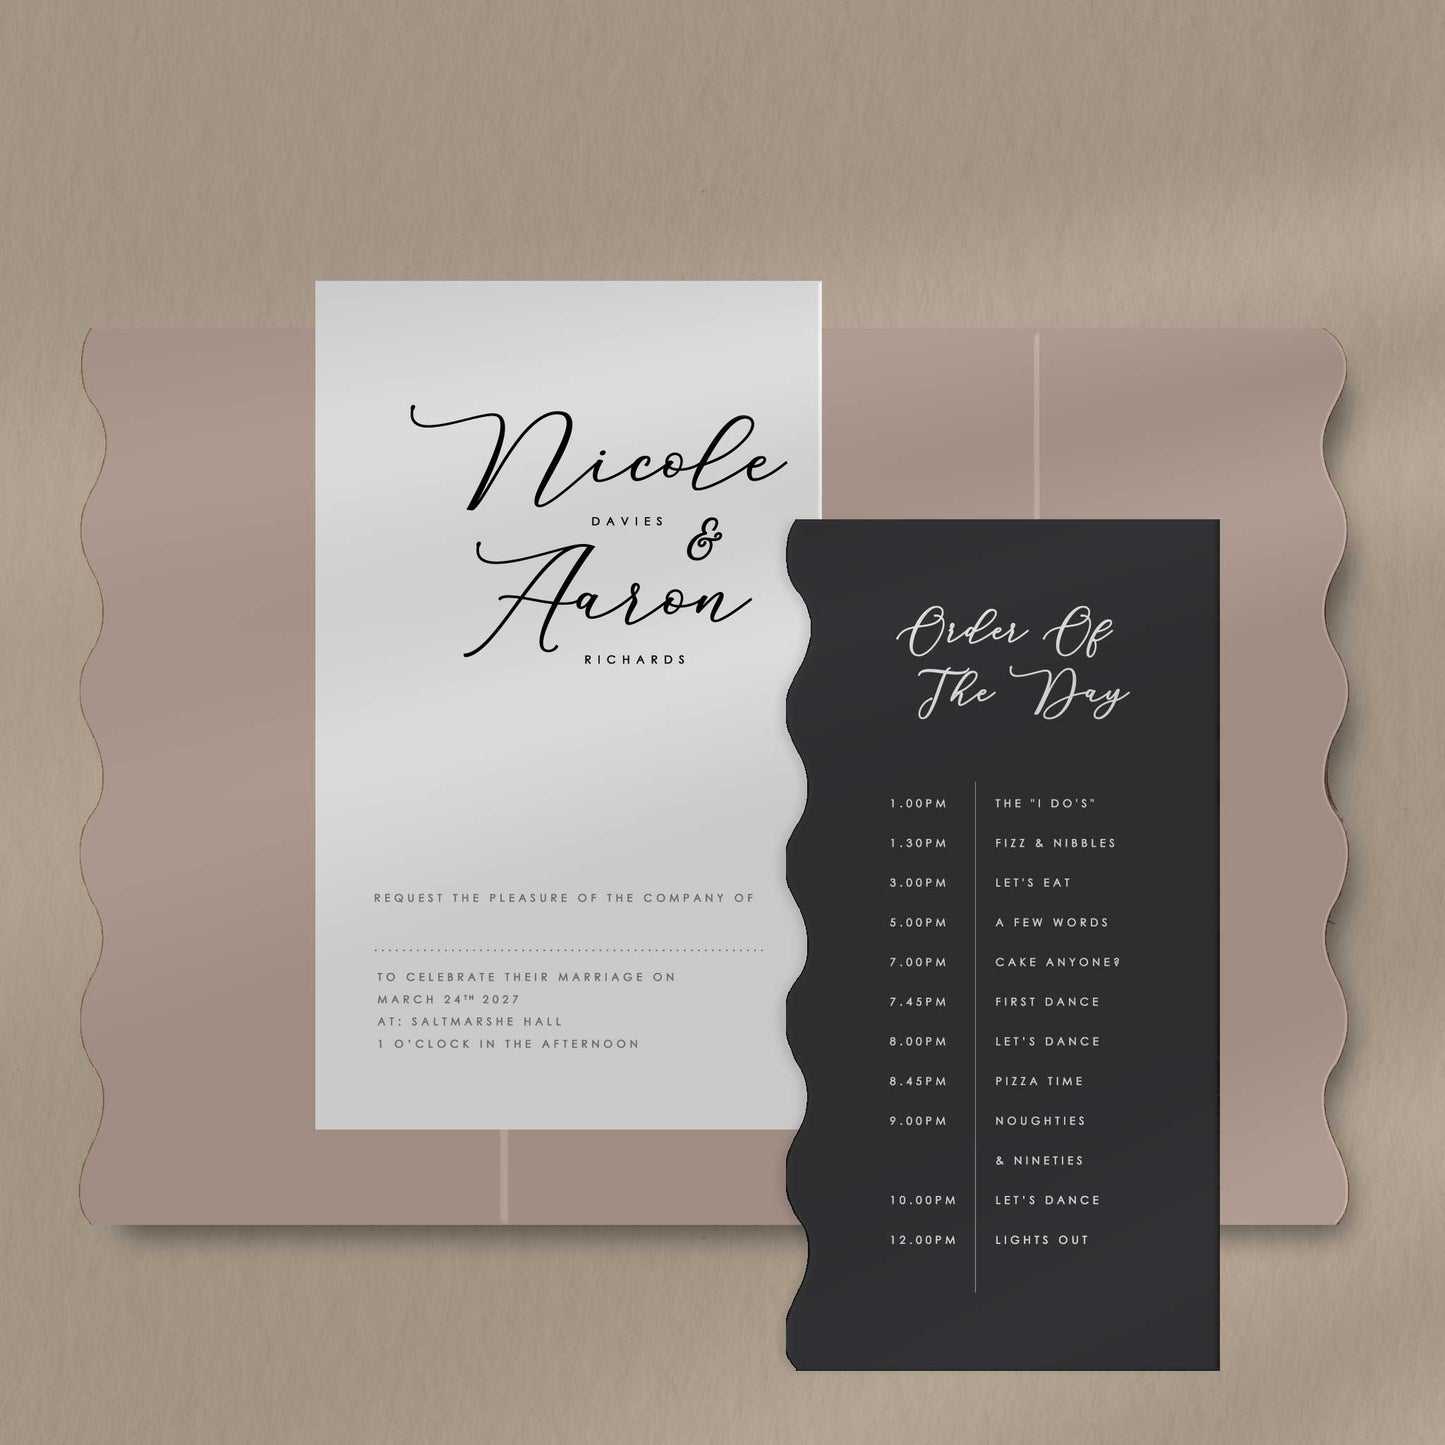 Scallop Envelope Sample  Ivy and Gold Wedding Stationery Nicole  